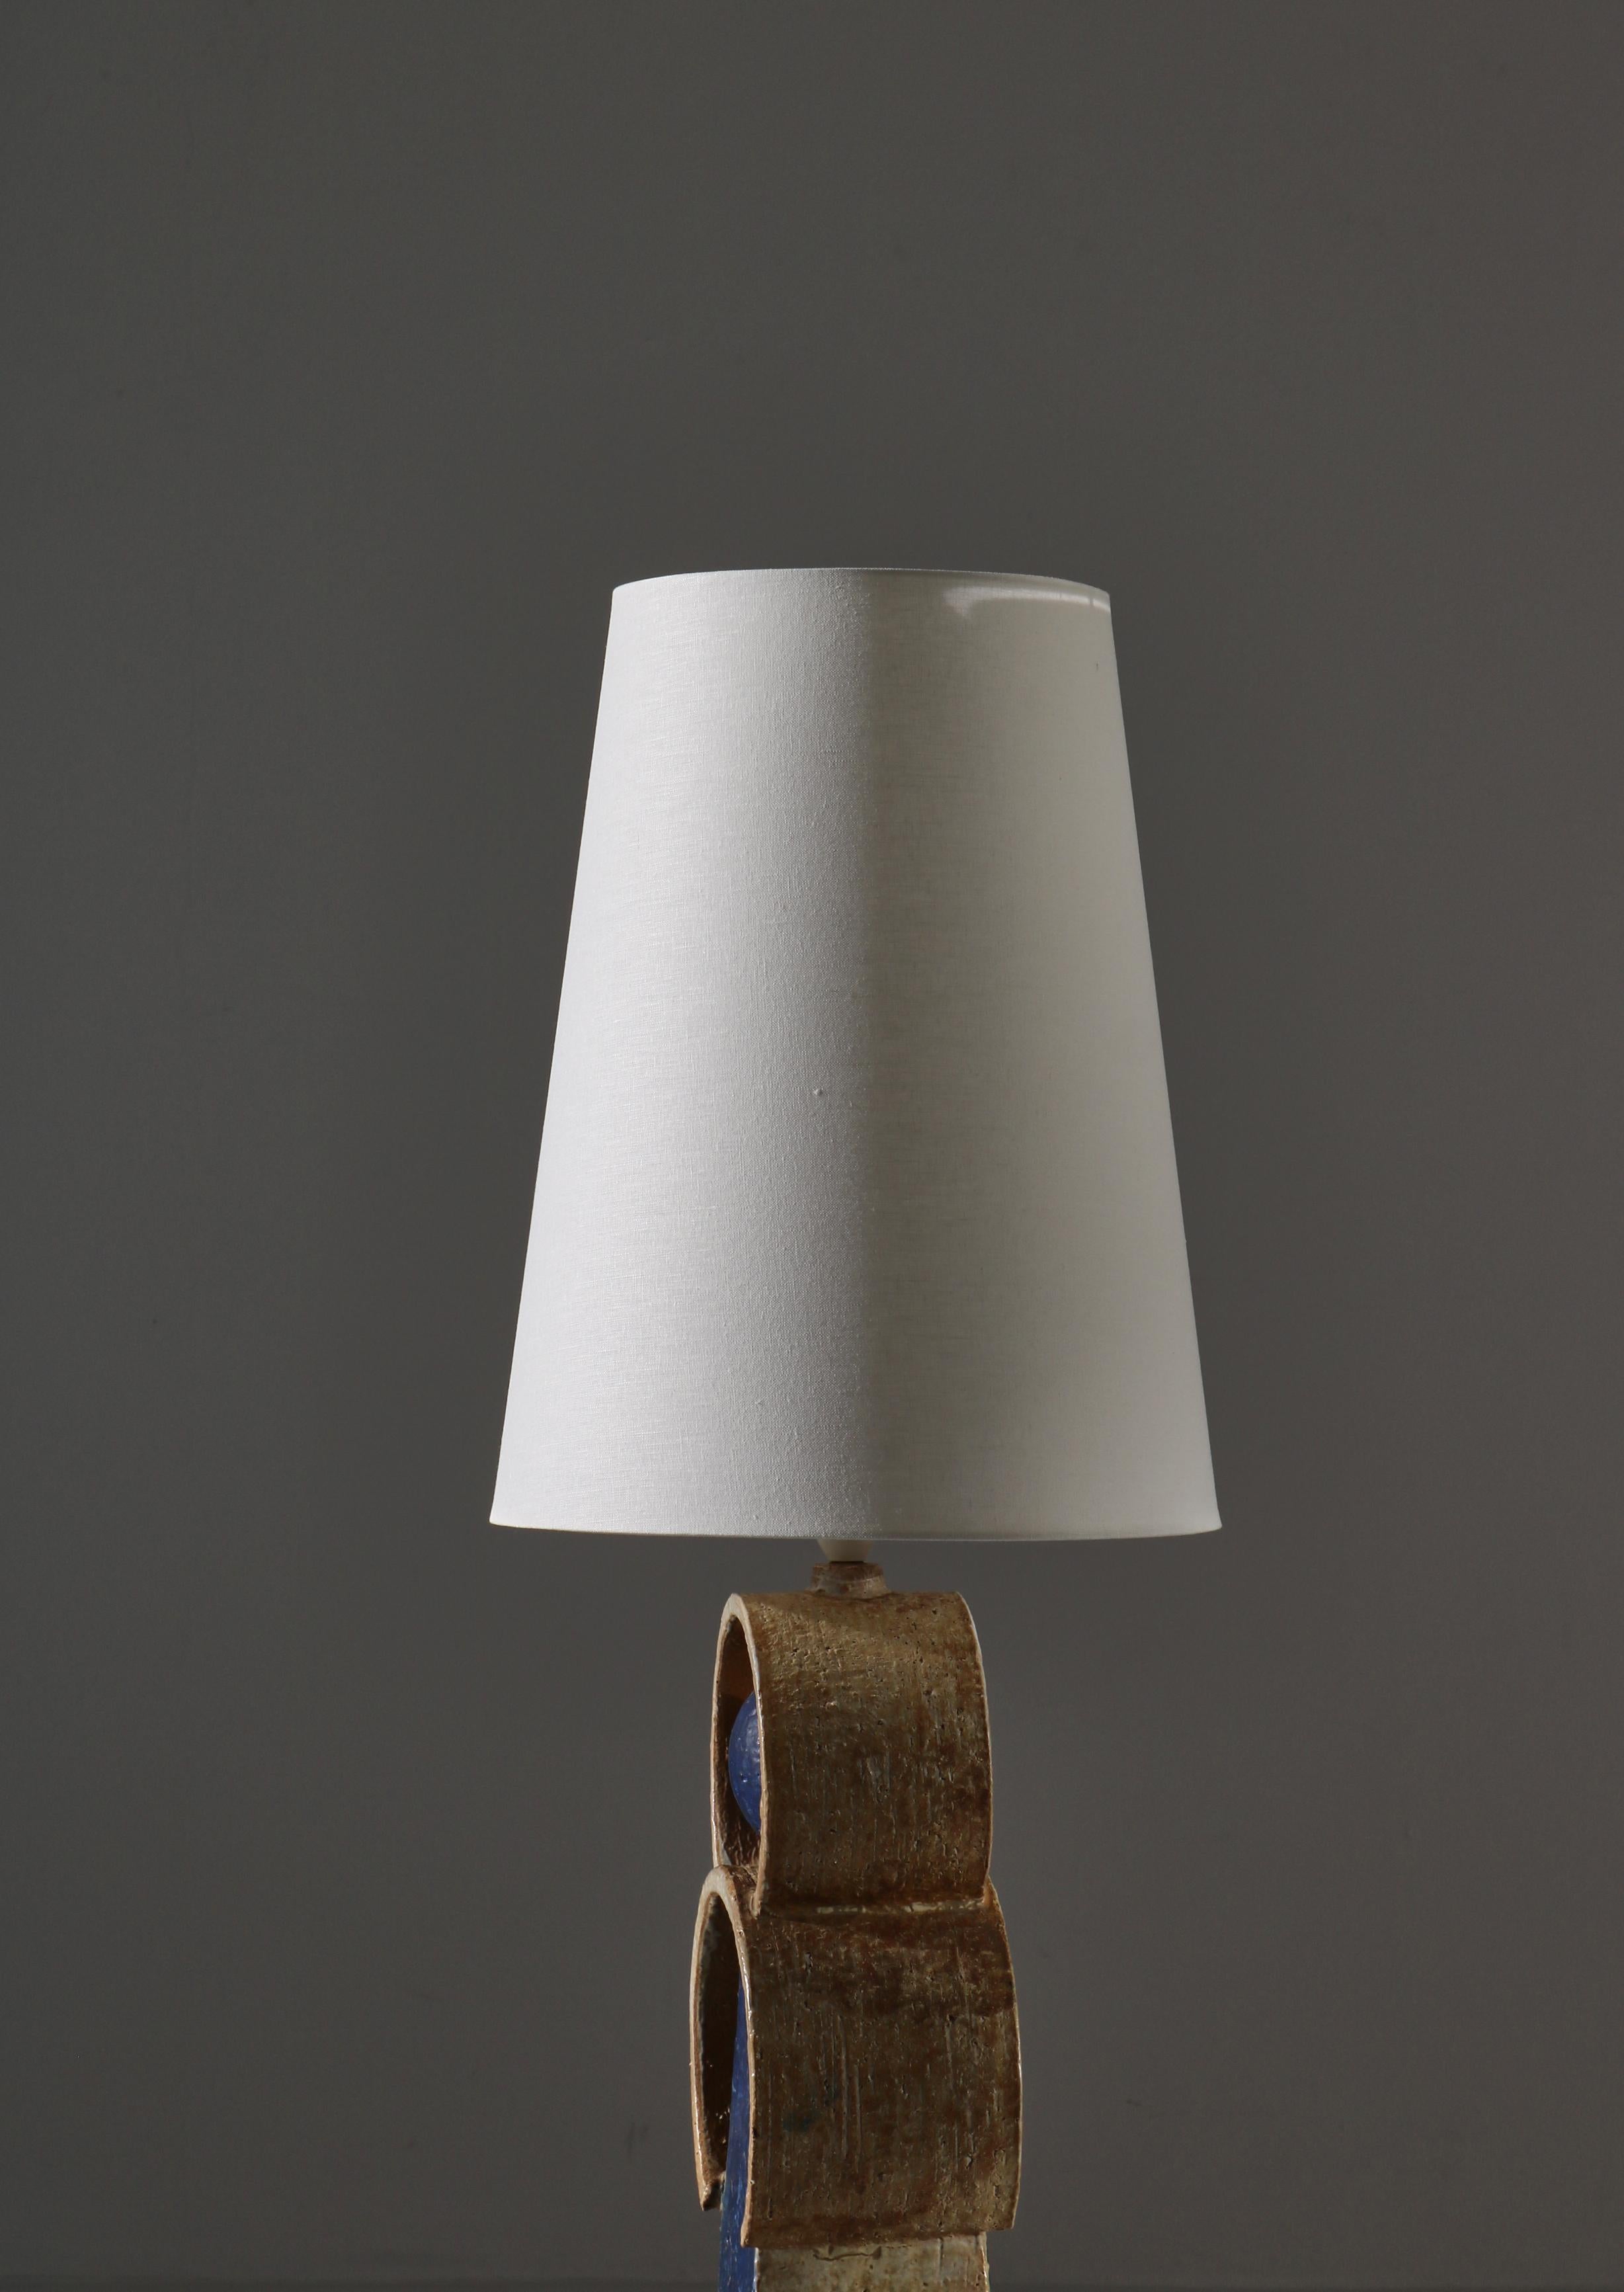 Large Handmade Brutalist Stoneware Table Lamp by Sejer Ceramics, Denmark, 1960s In Good Condition For Sale In Odense, DK